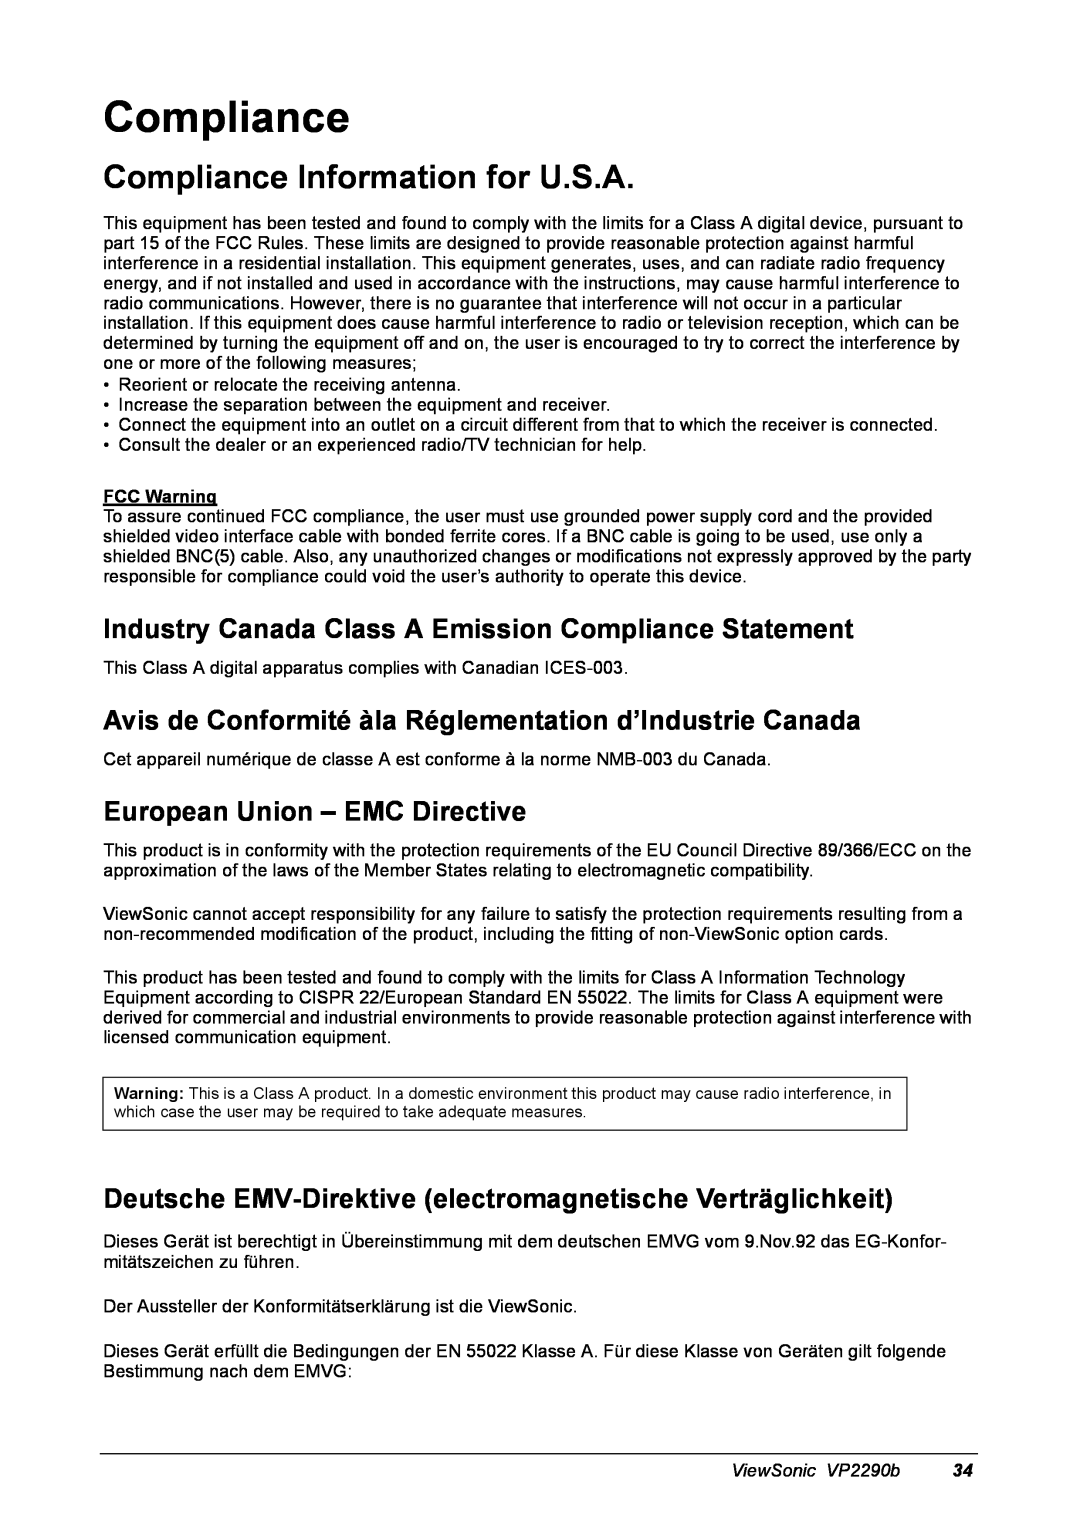 ViewSonic VP2290B Compliance Information for U.S.A, Industry Canada Class A Emission Compliance Statement, FCC Warning 